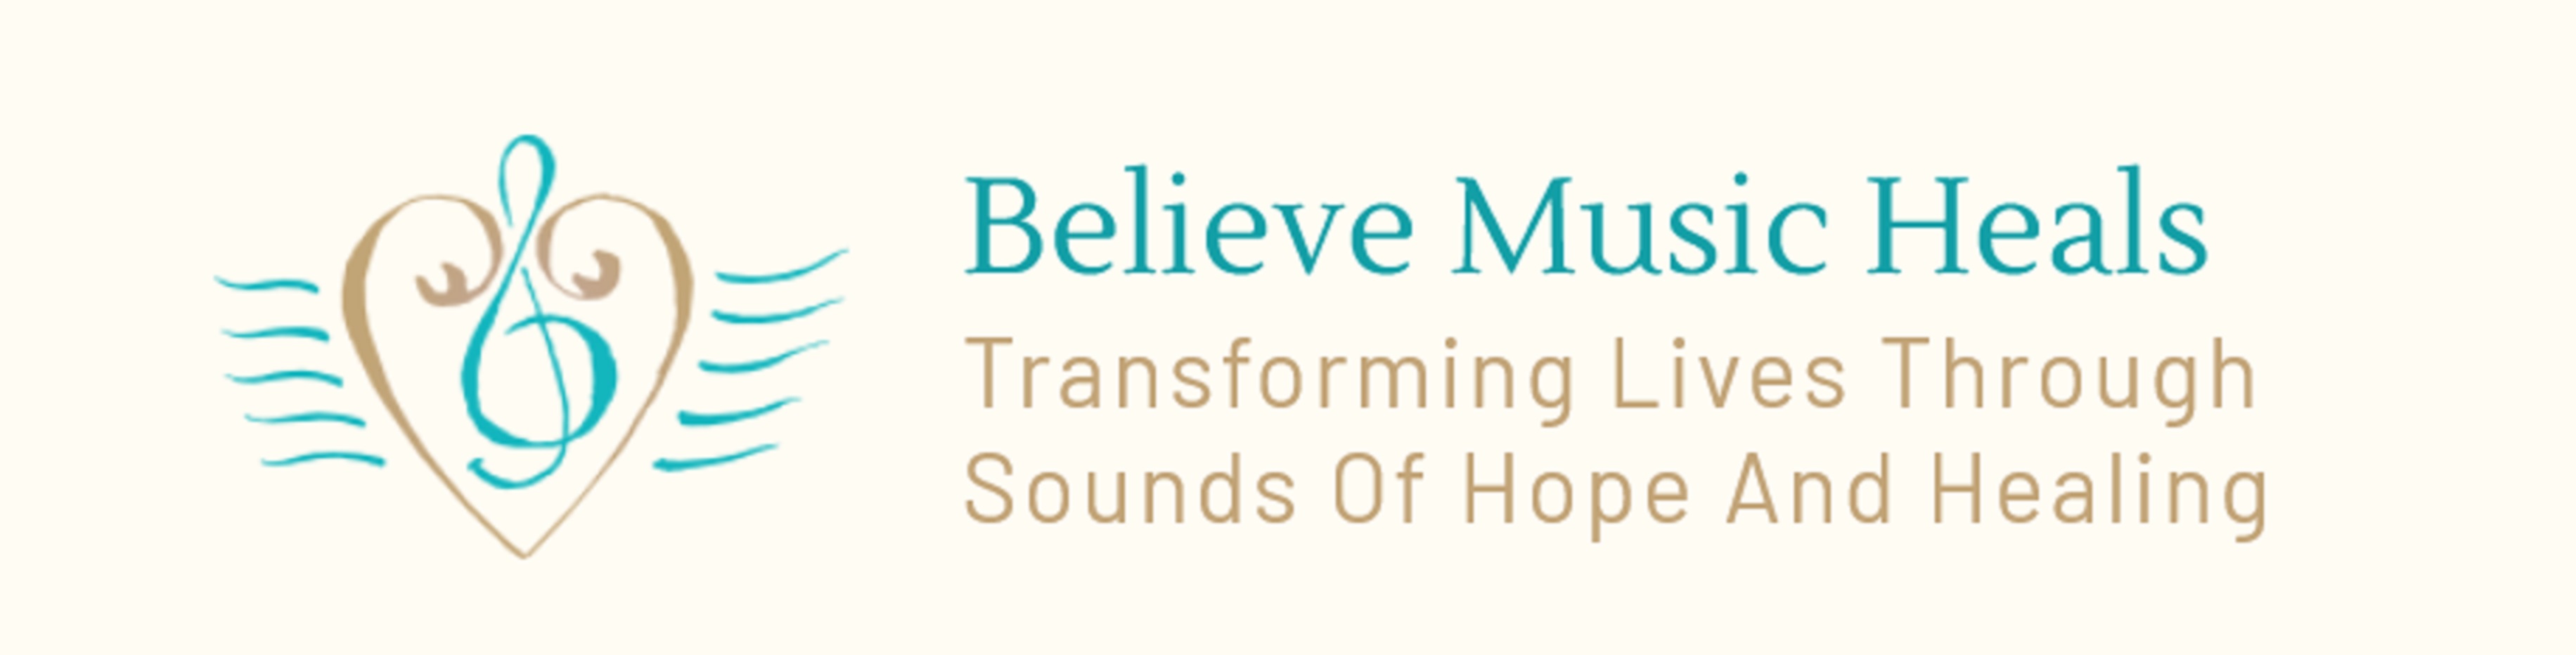 Believe Music Heals Launches to Transform Lives Through Music